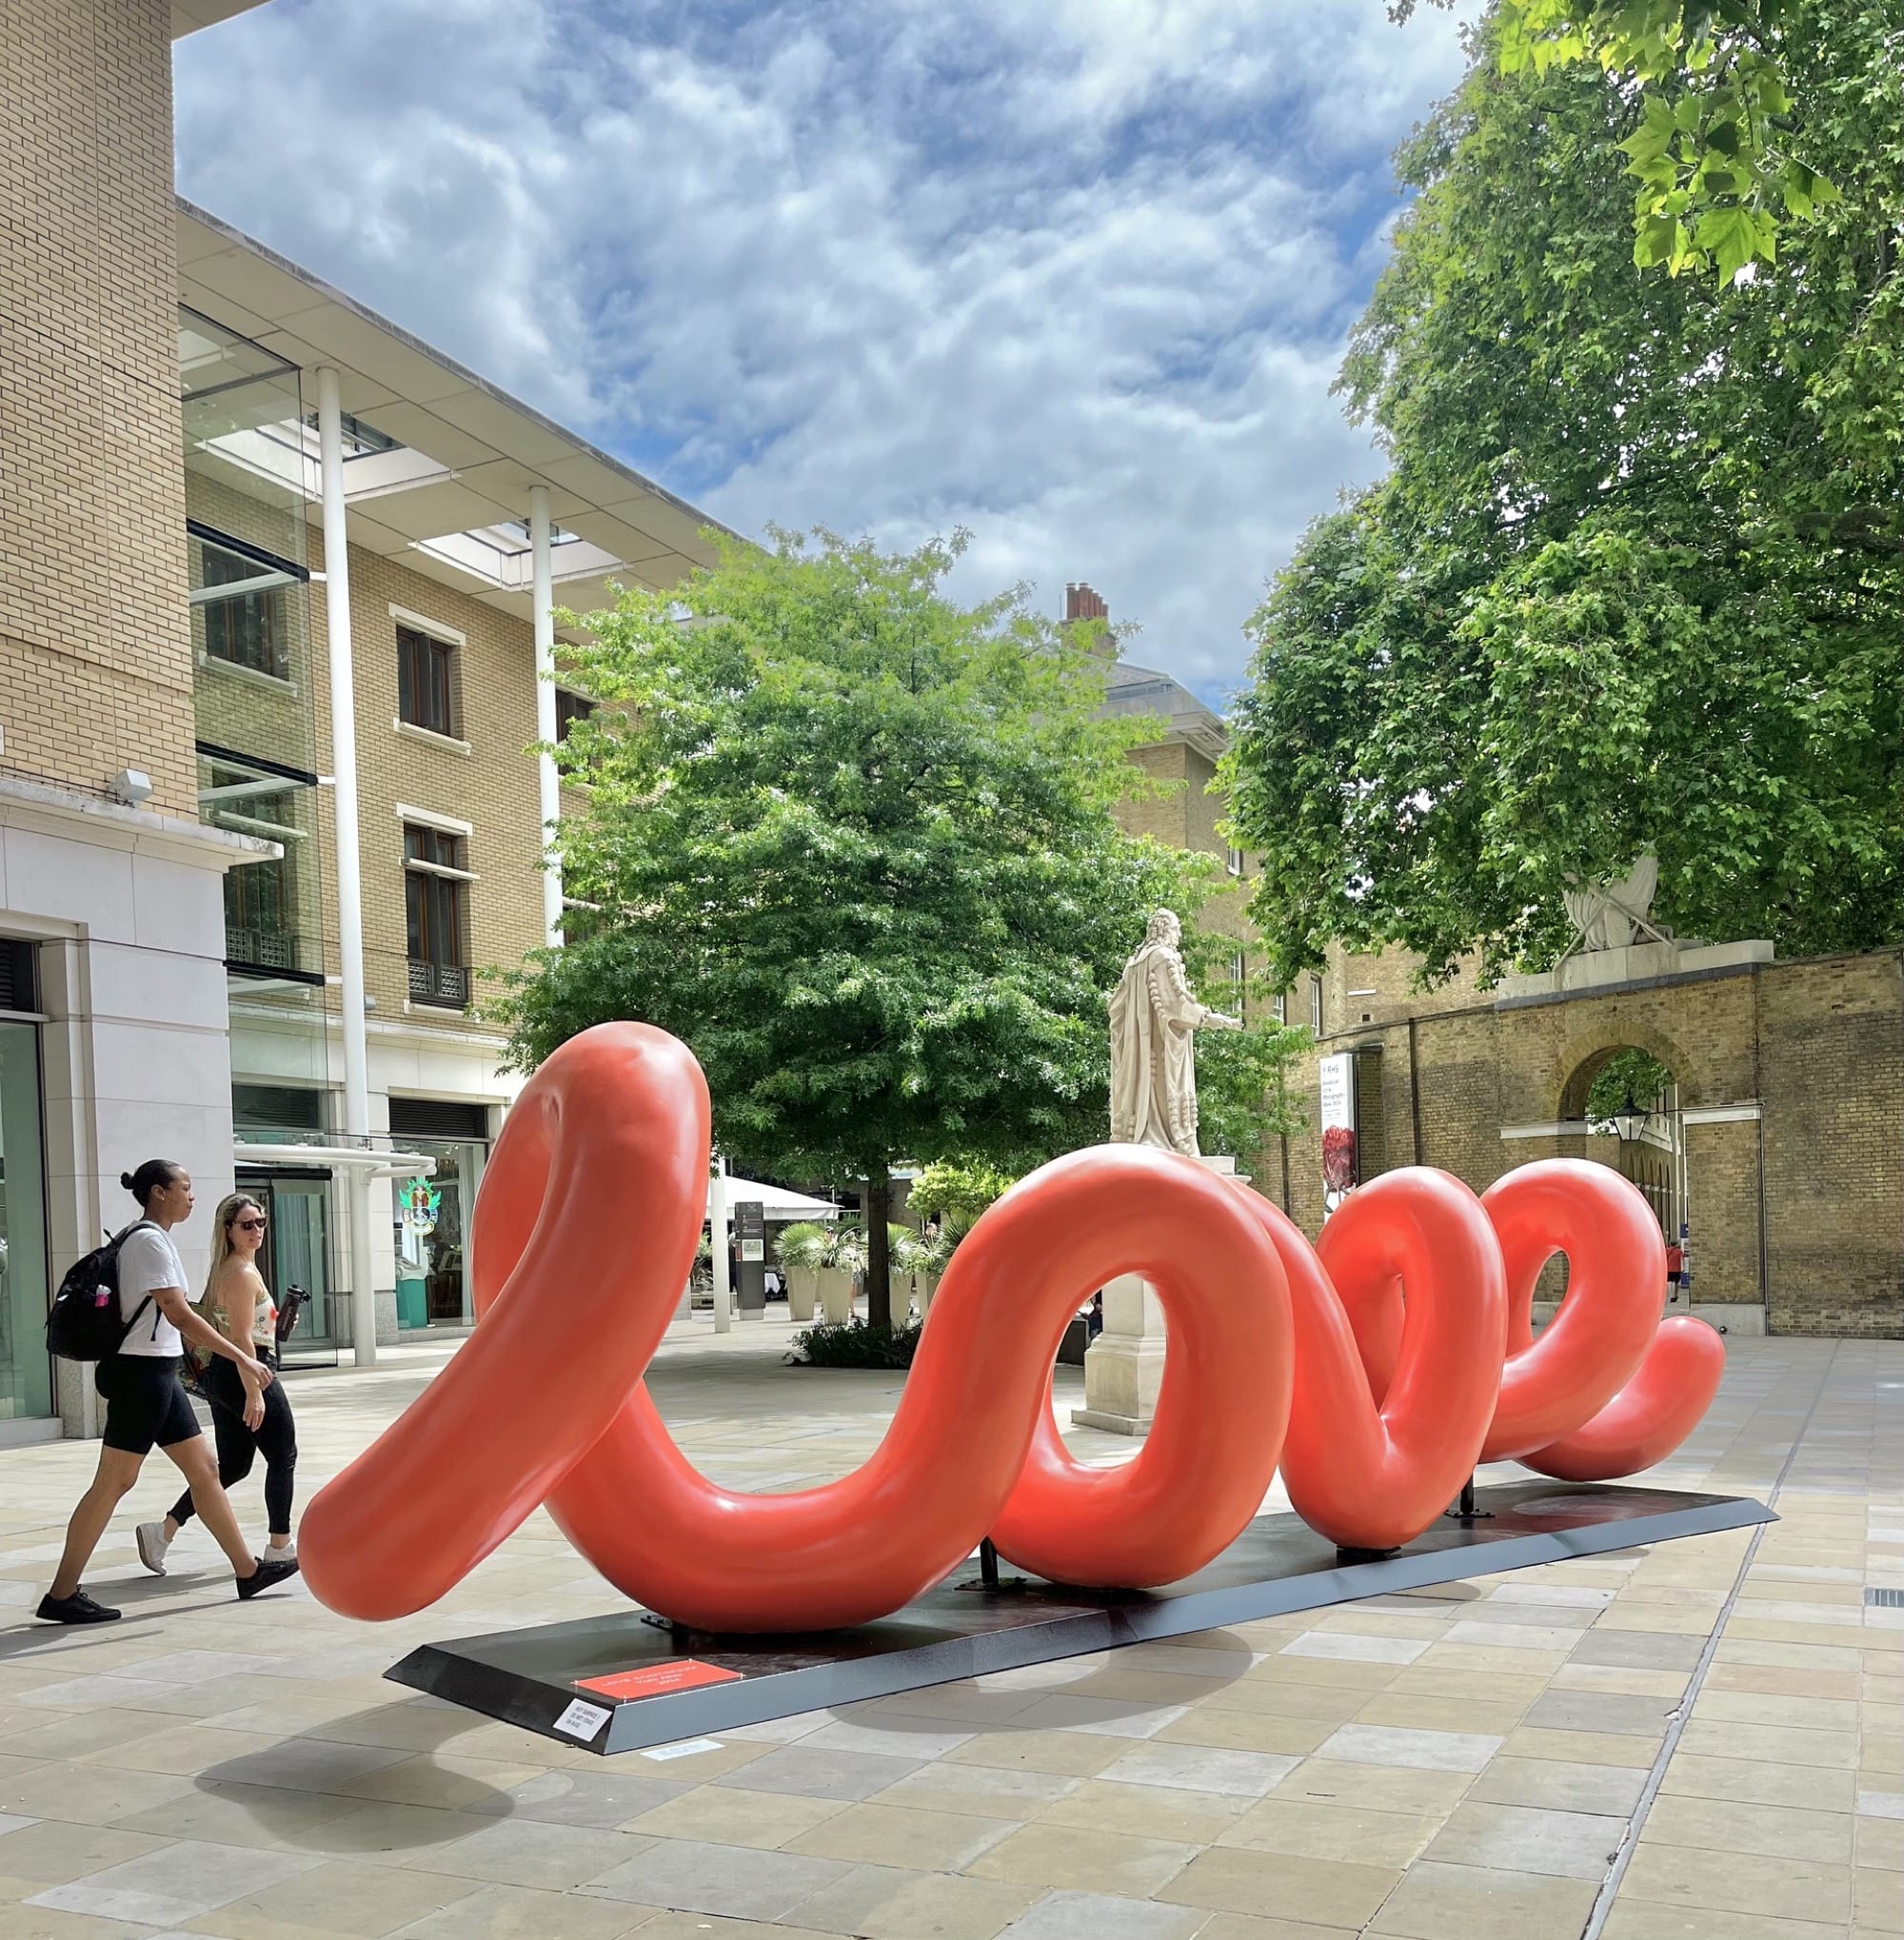 a large-scale, red public sculpture of curving lines that spell the word "love" when viewed from the right perspective, shown in this image with two people walking past it in Duke of York Square in London